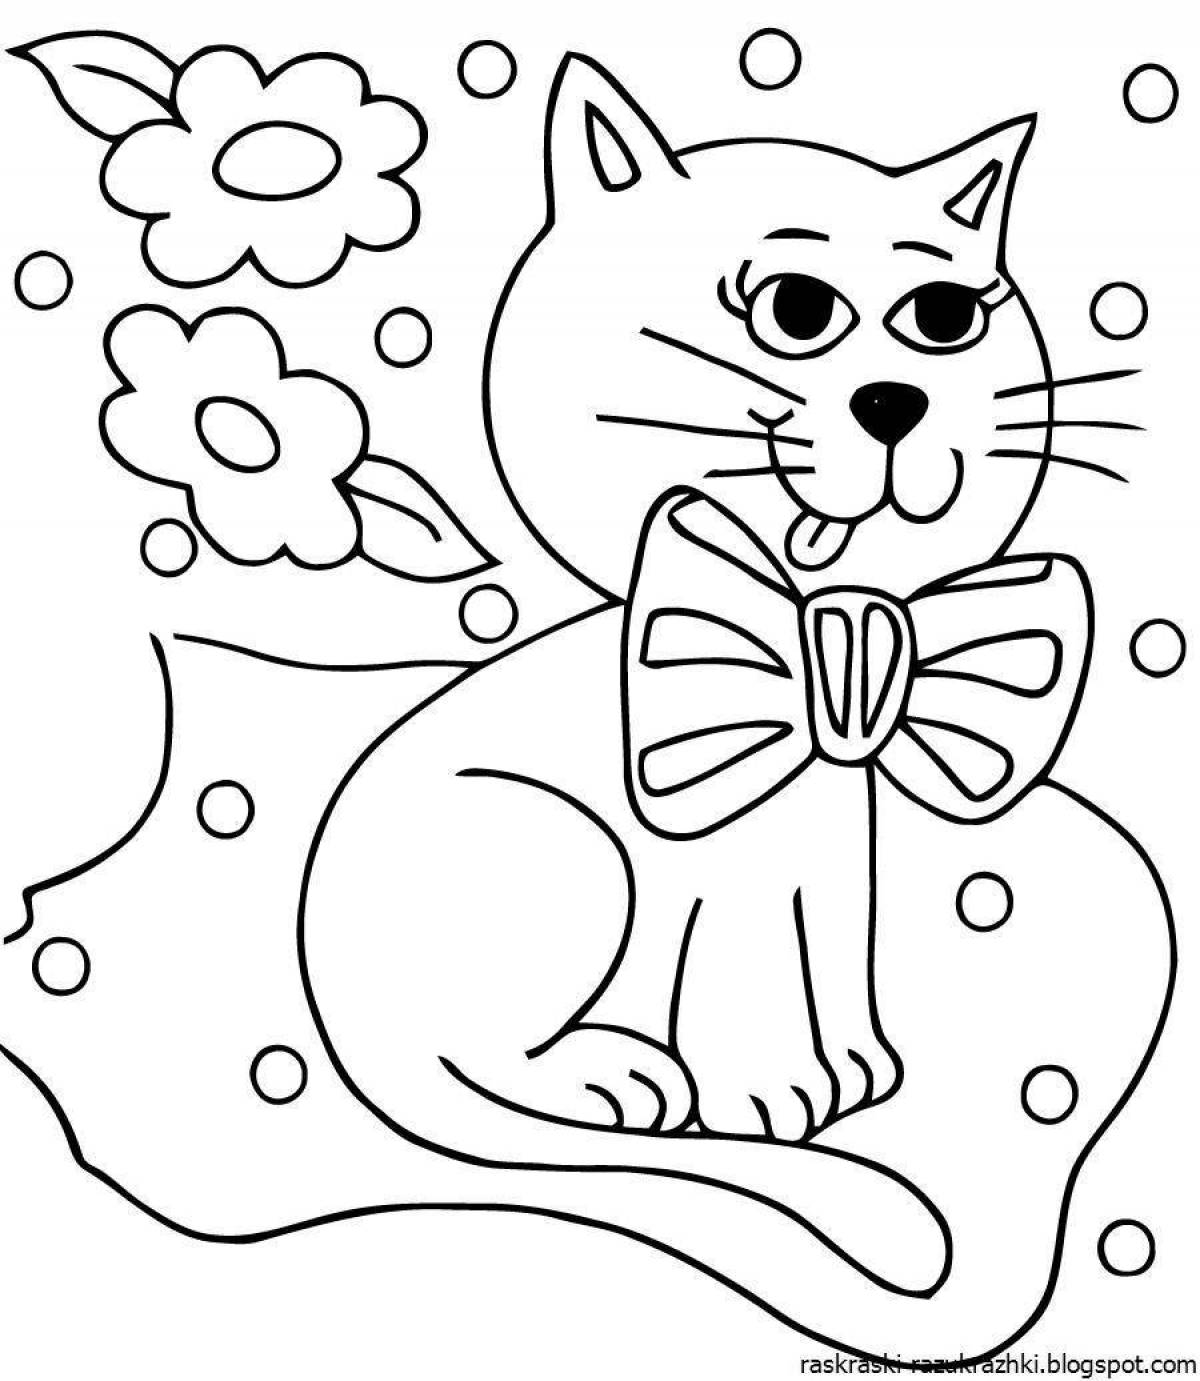 Amazing coloring pages for 5-6 year olds with cats